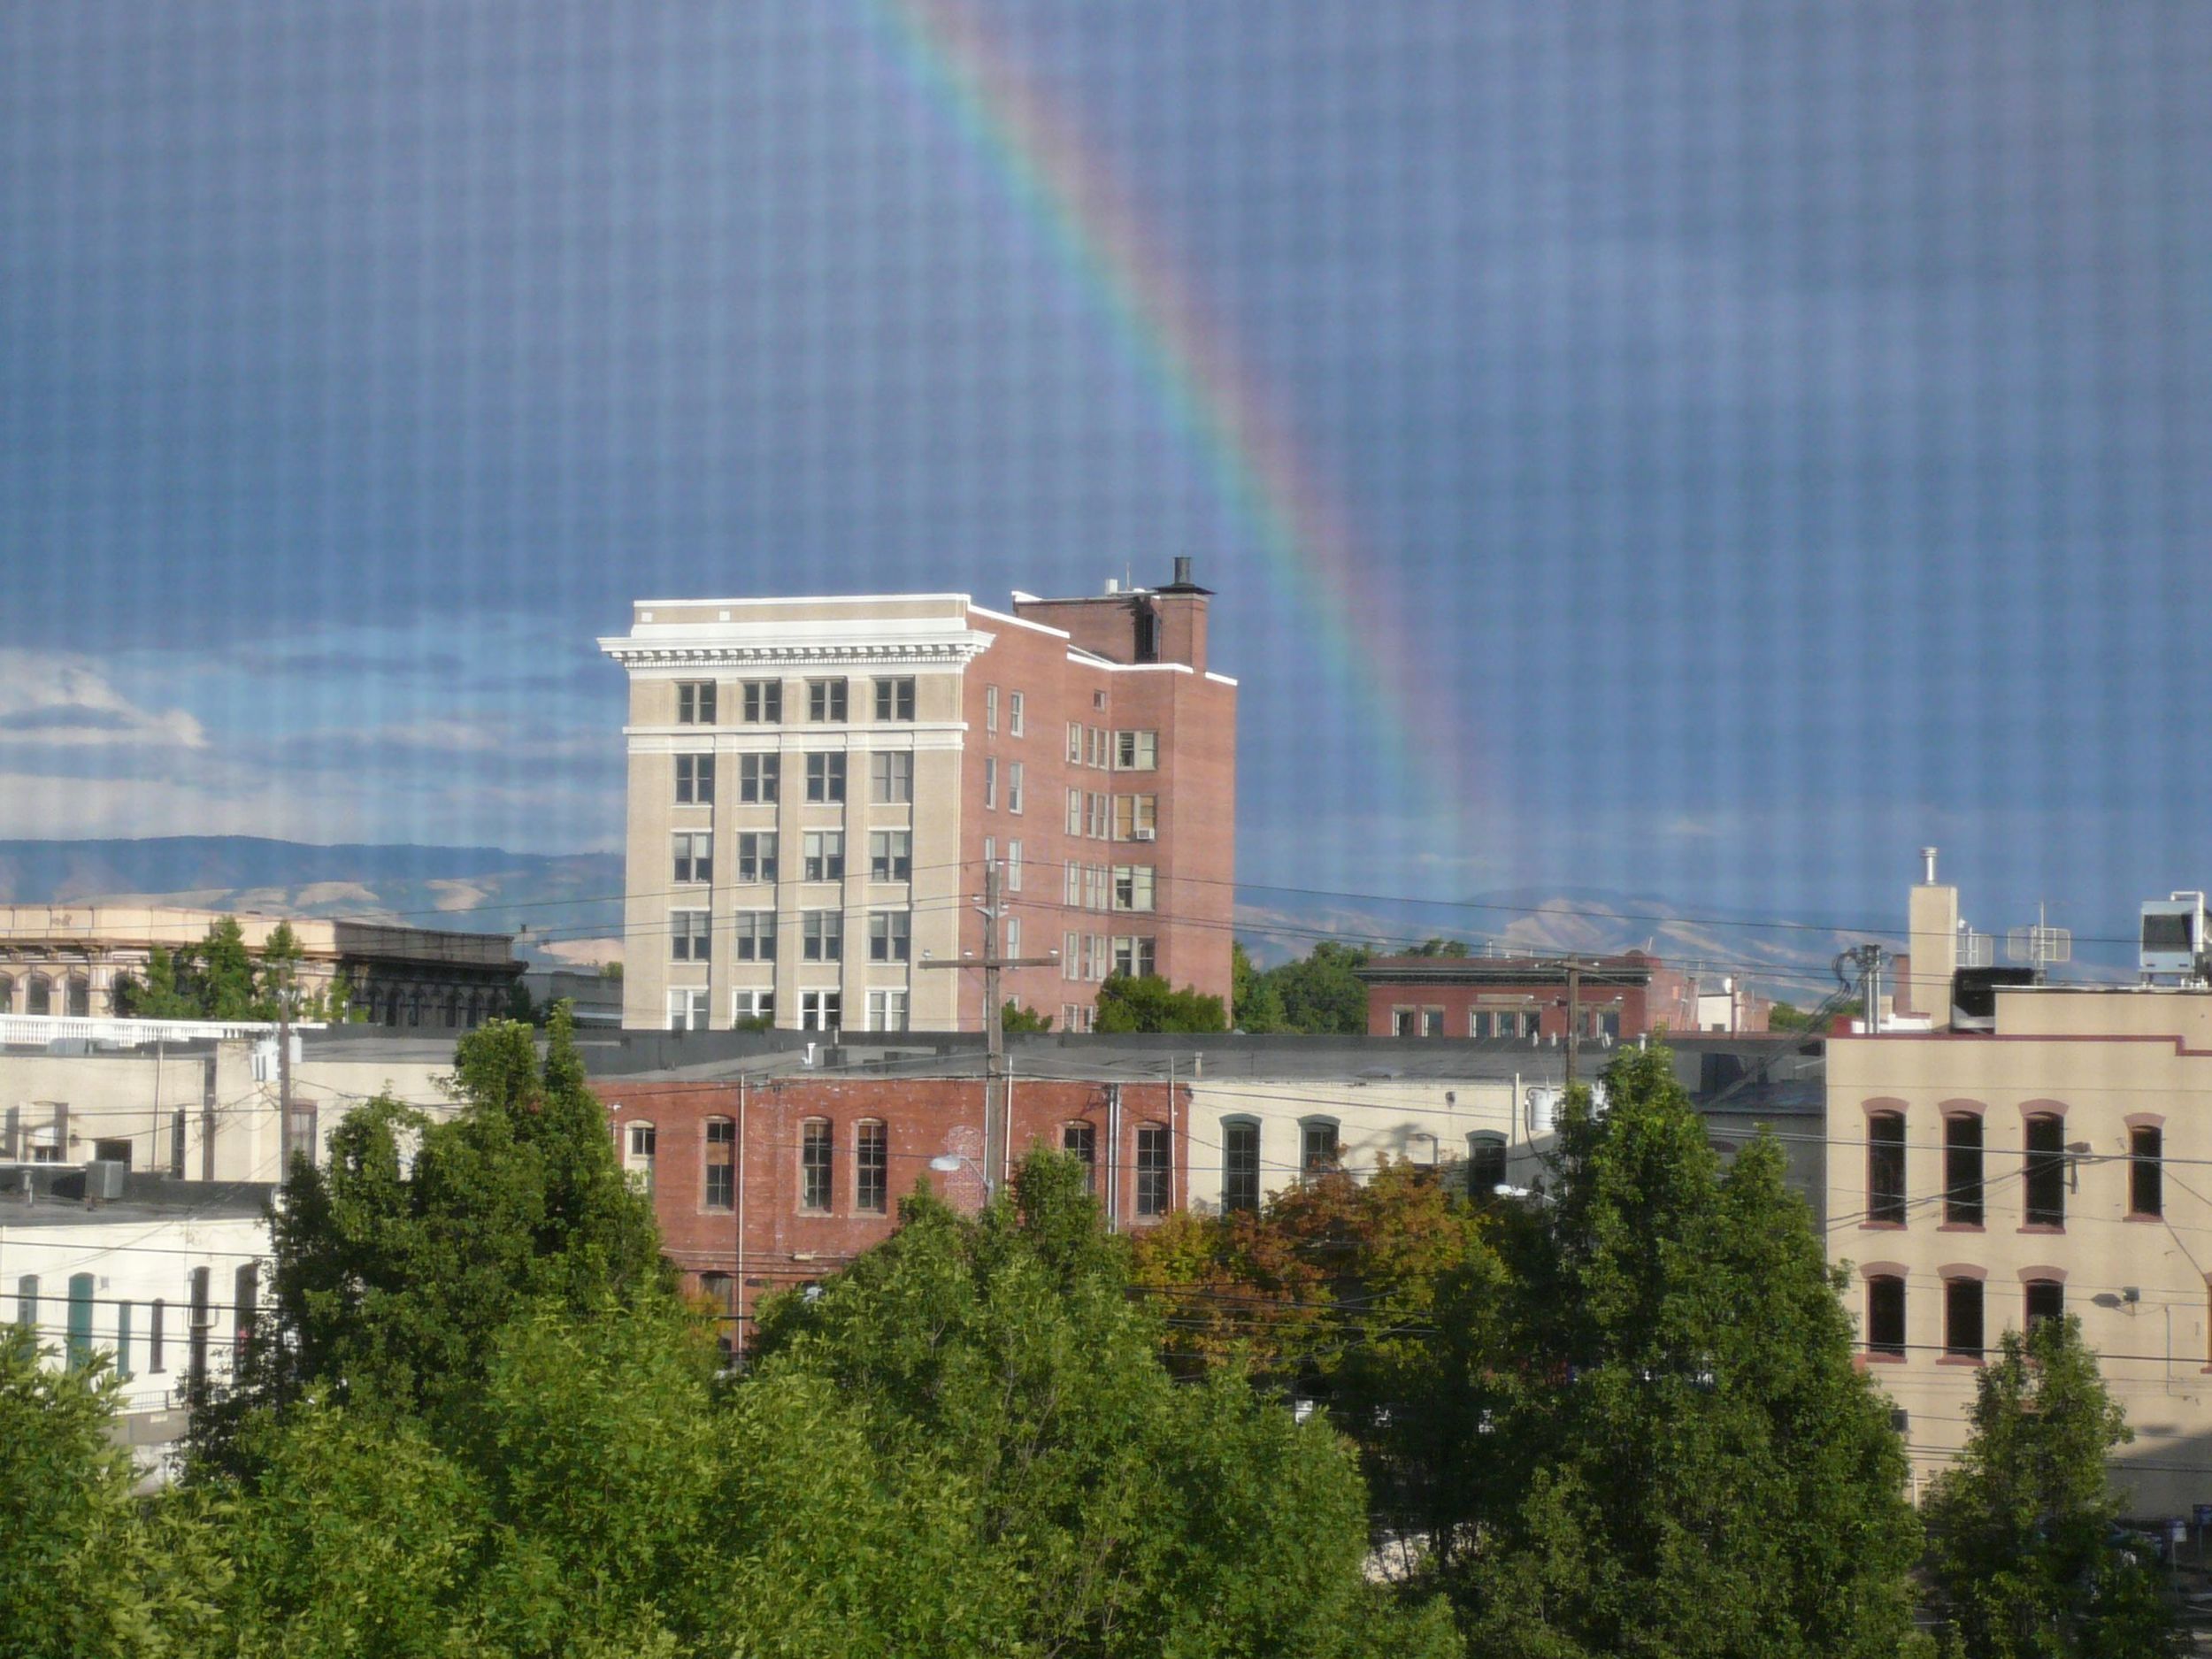 Marcus Whitman Hotel and Rainbow to the east.